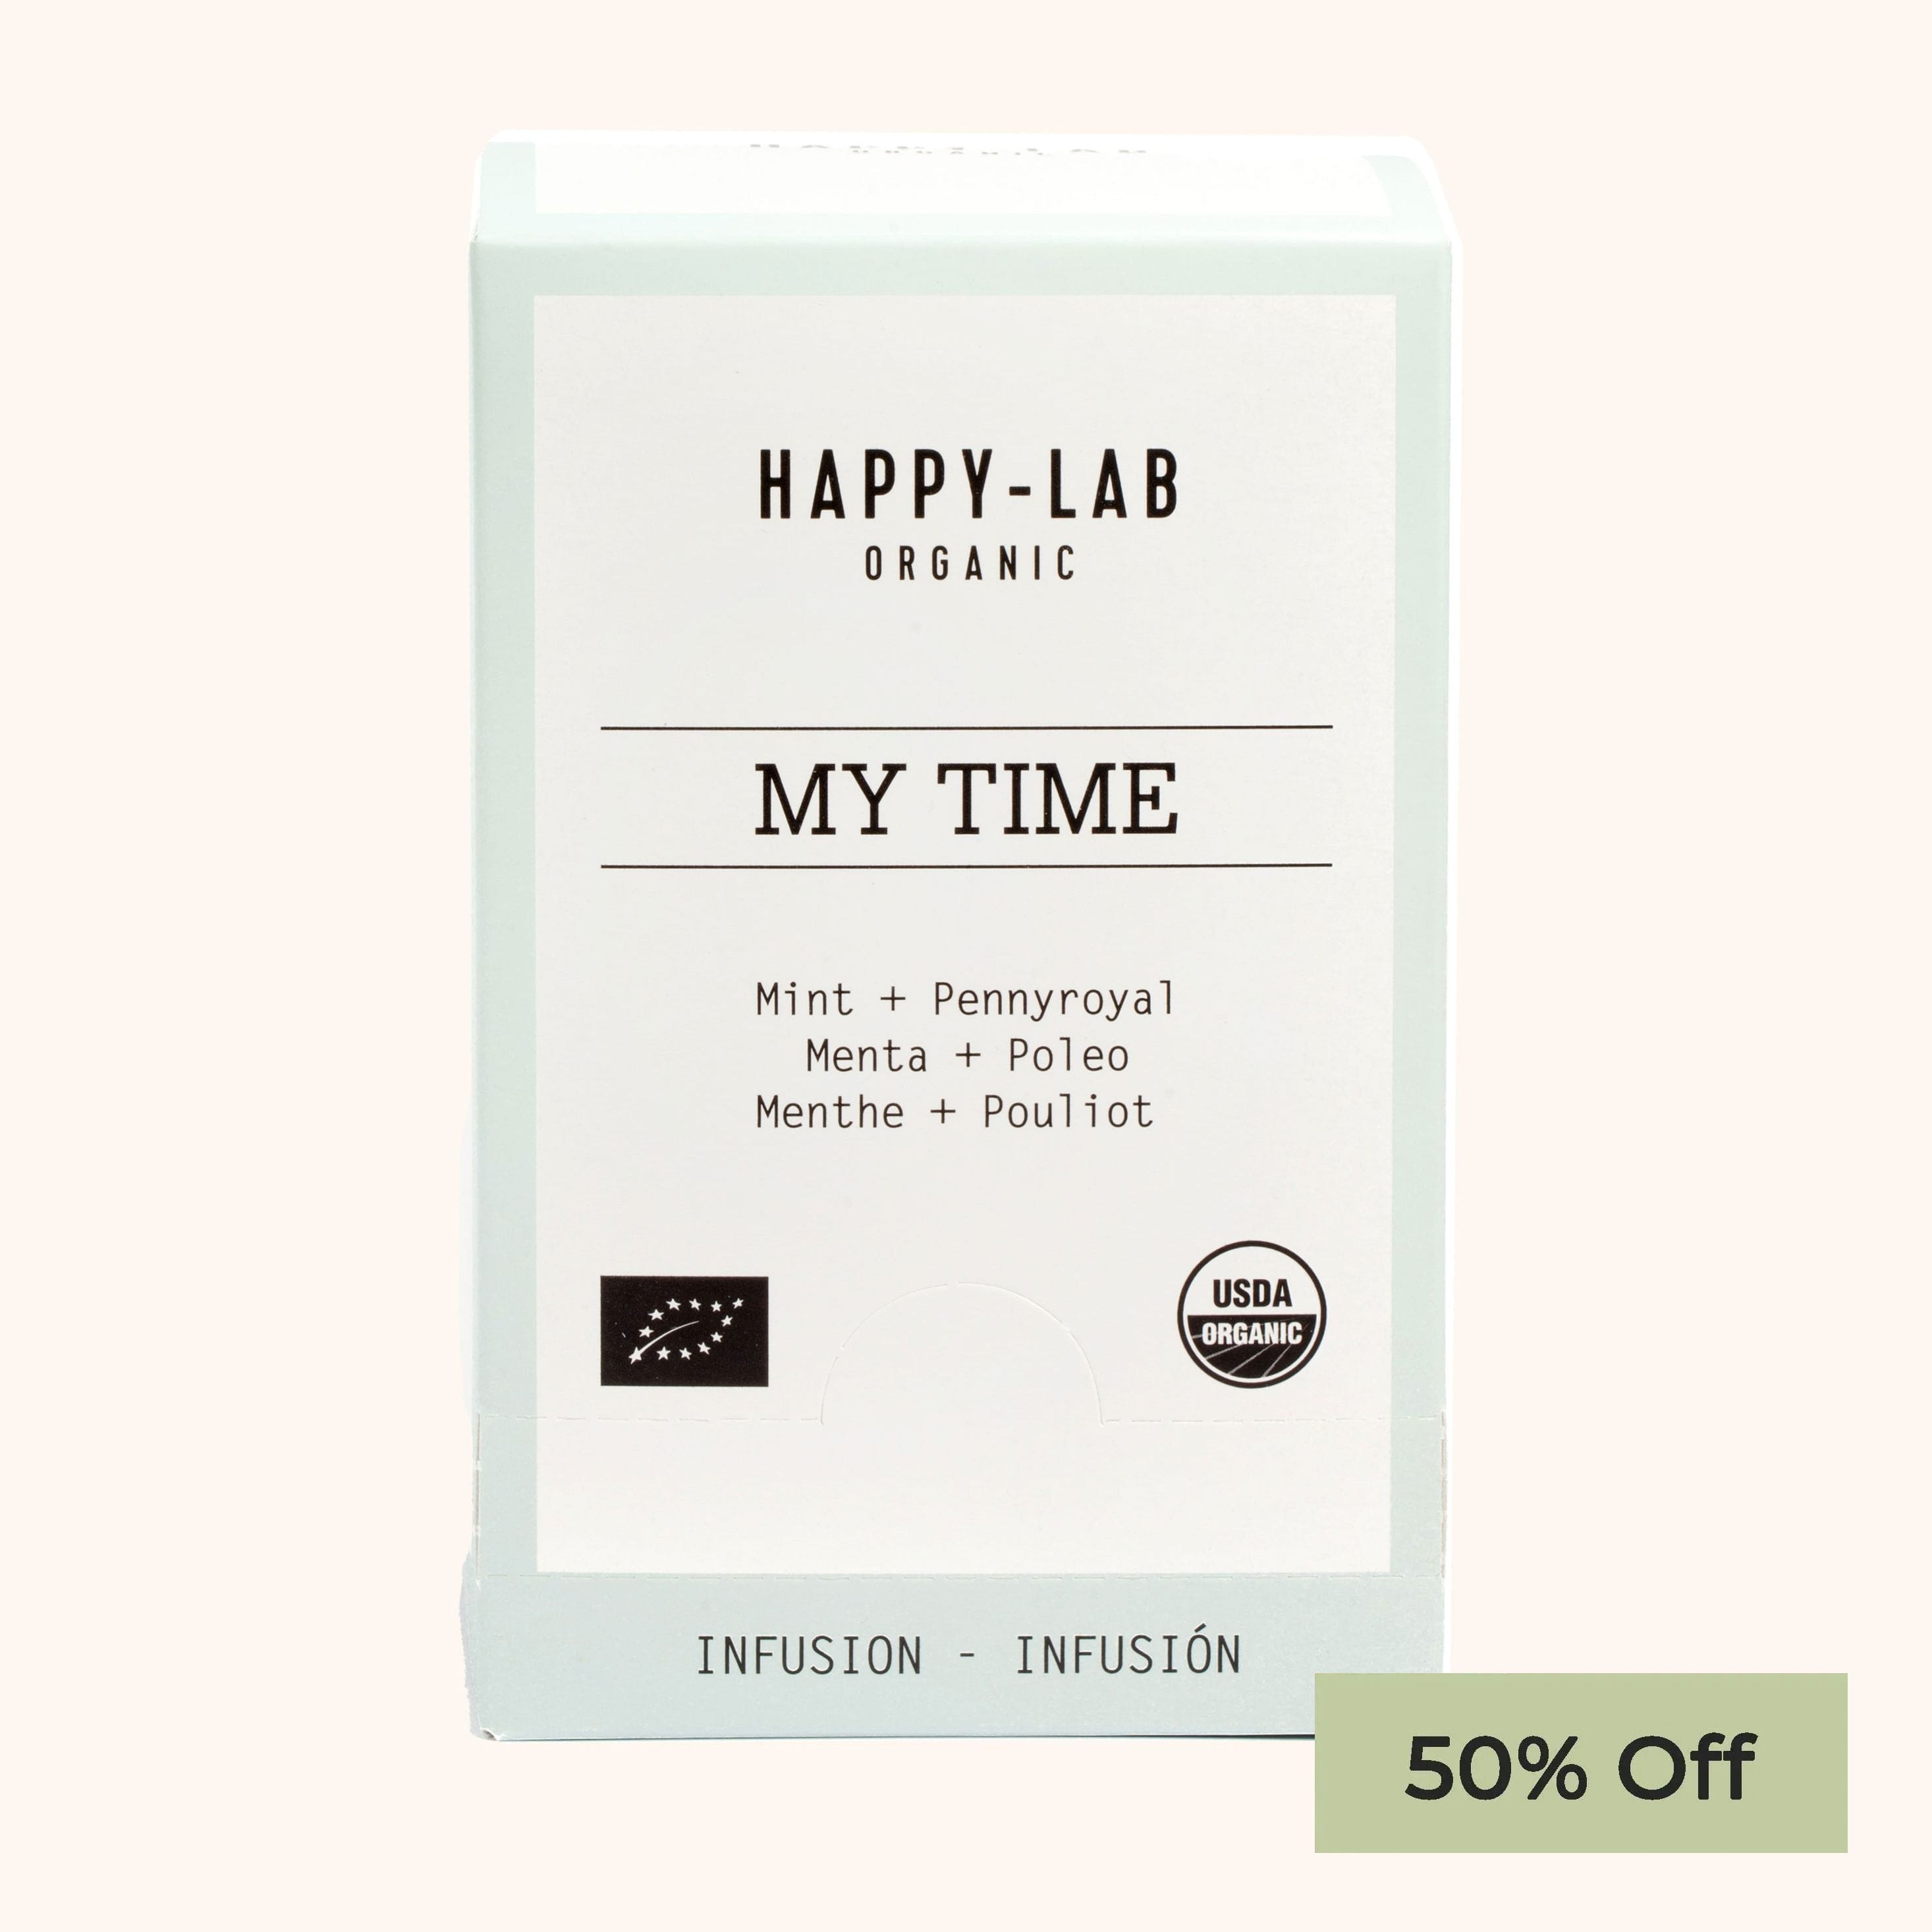 Happy-Lab My Time Tea Package